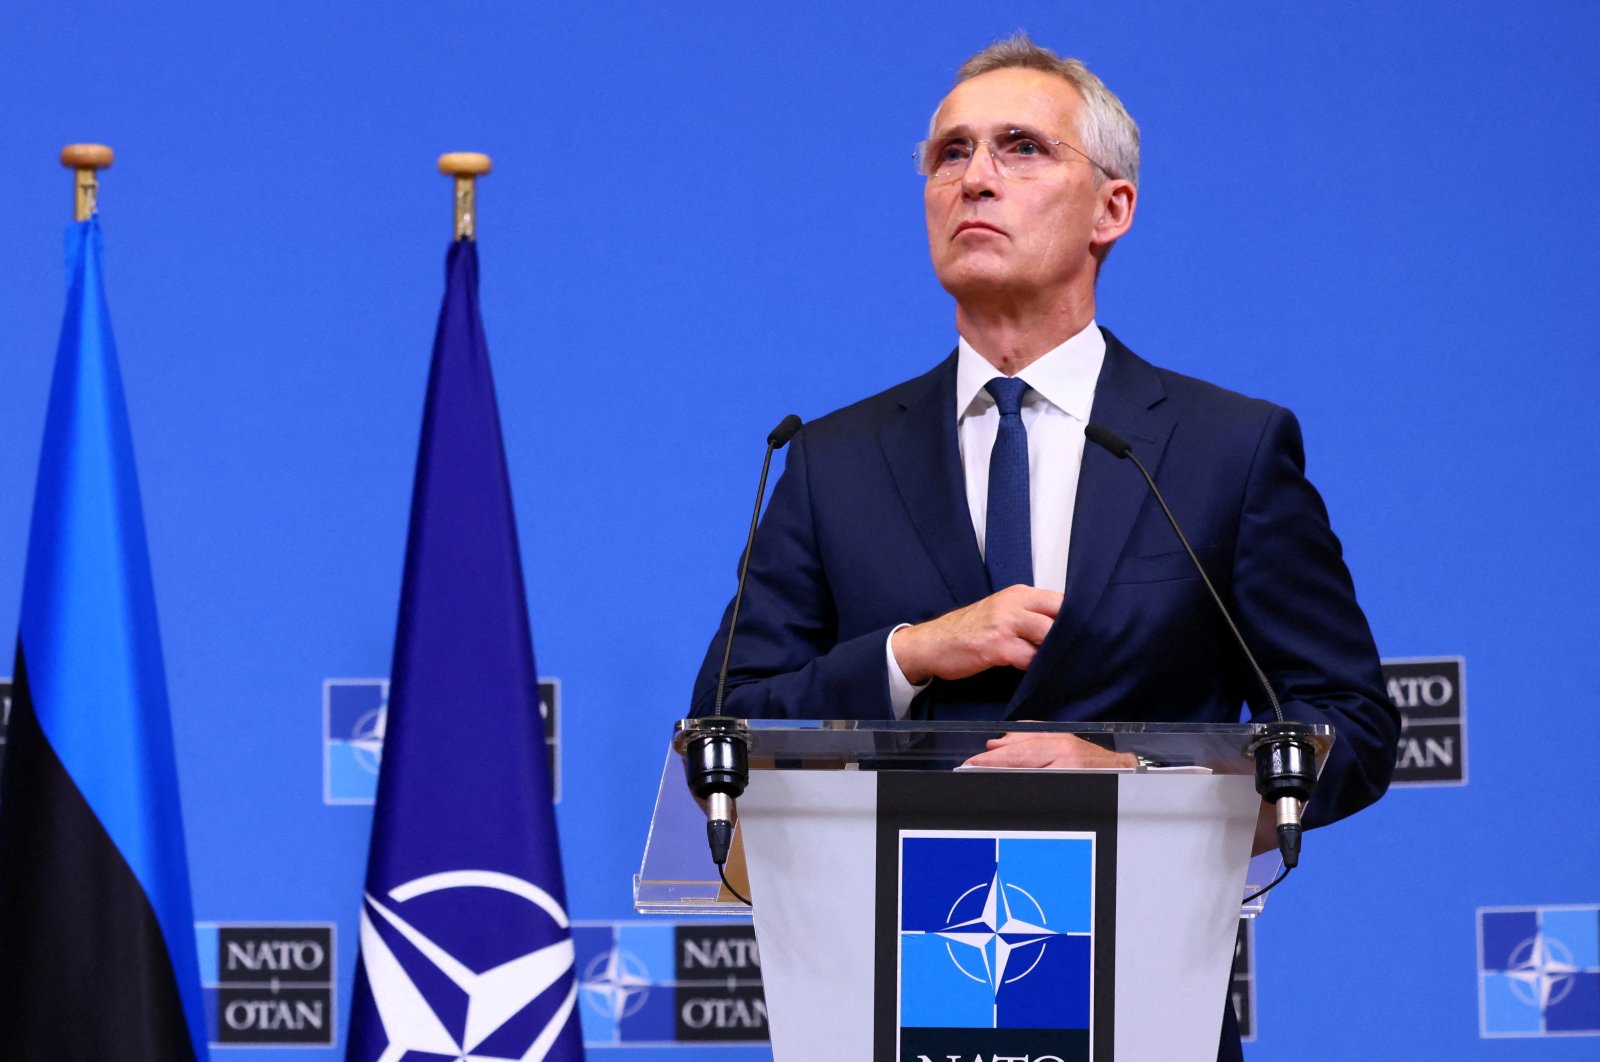 NATO chief Stoltenberg’s term extended ahead of summit